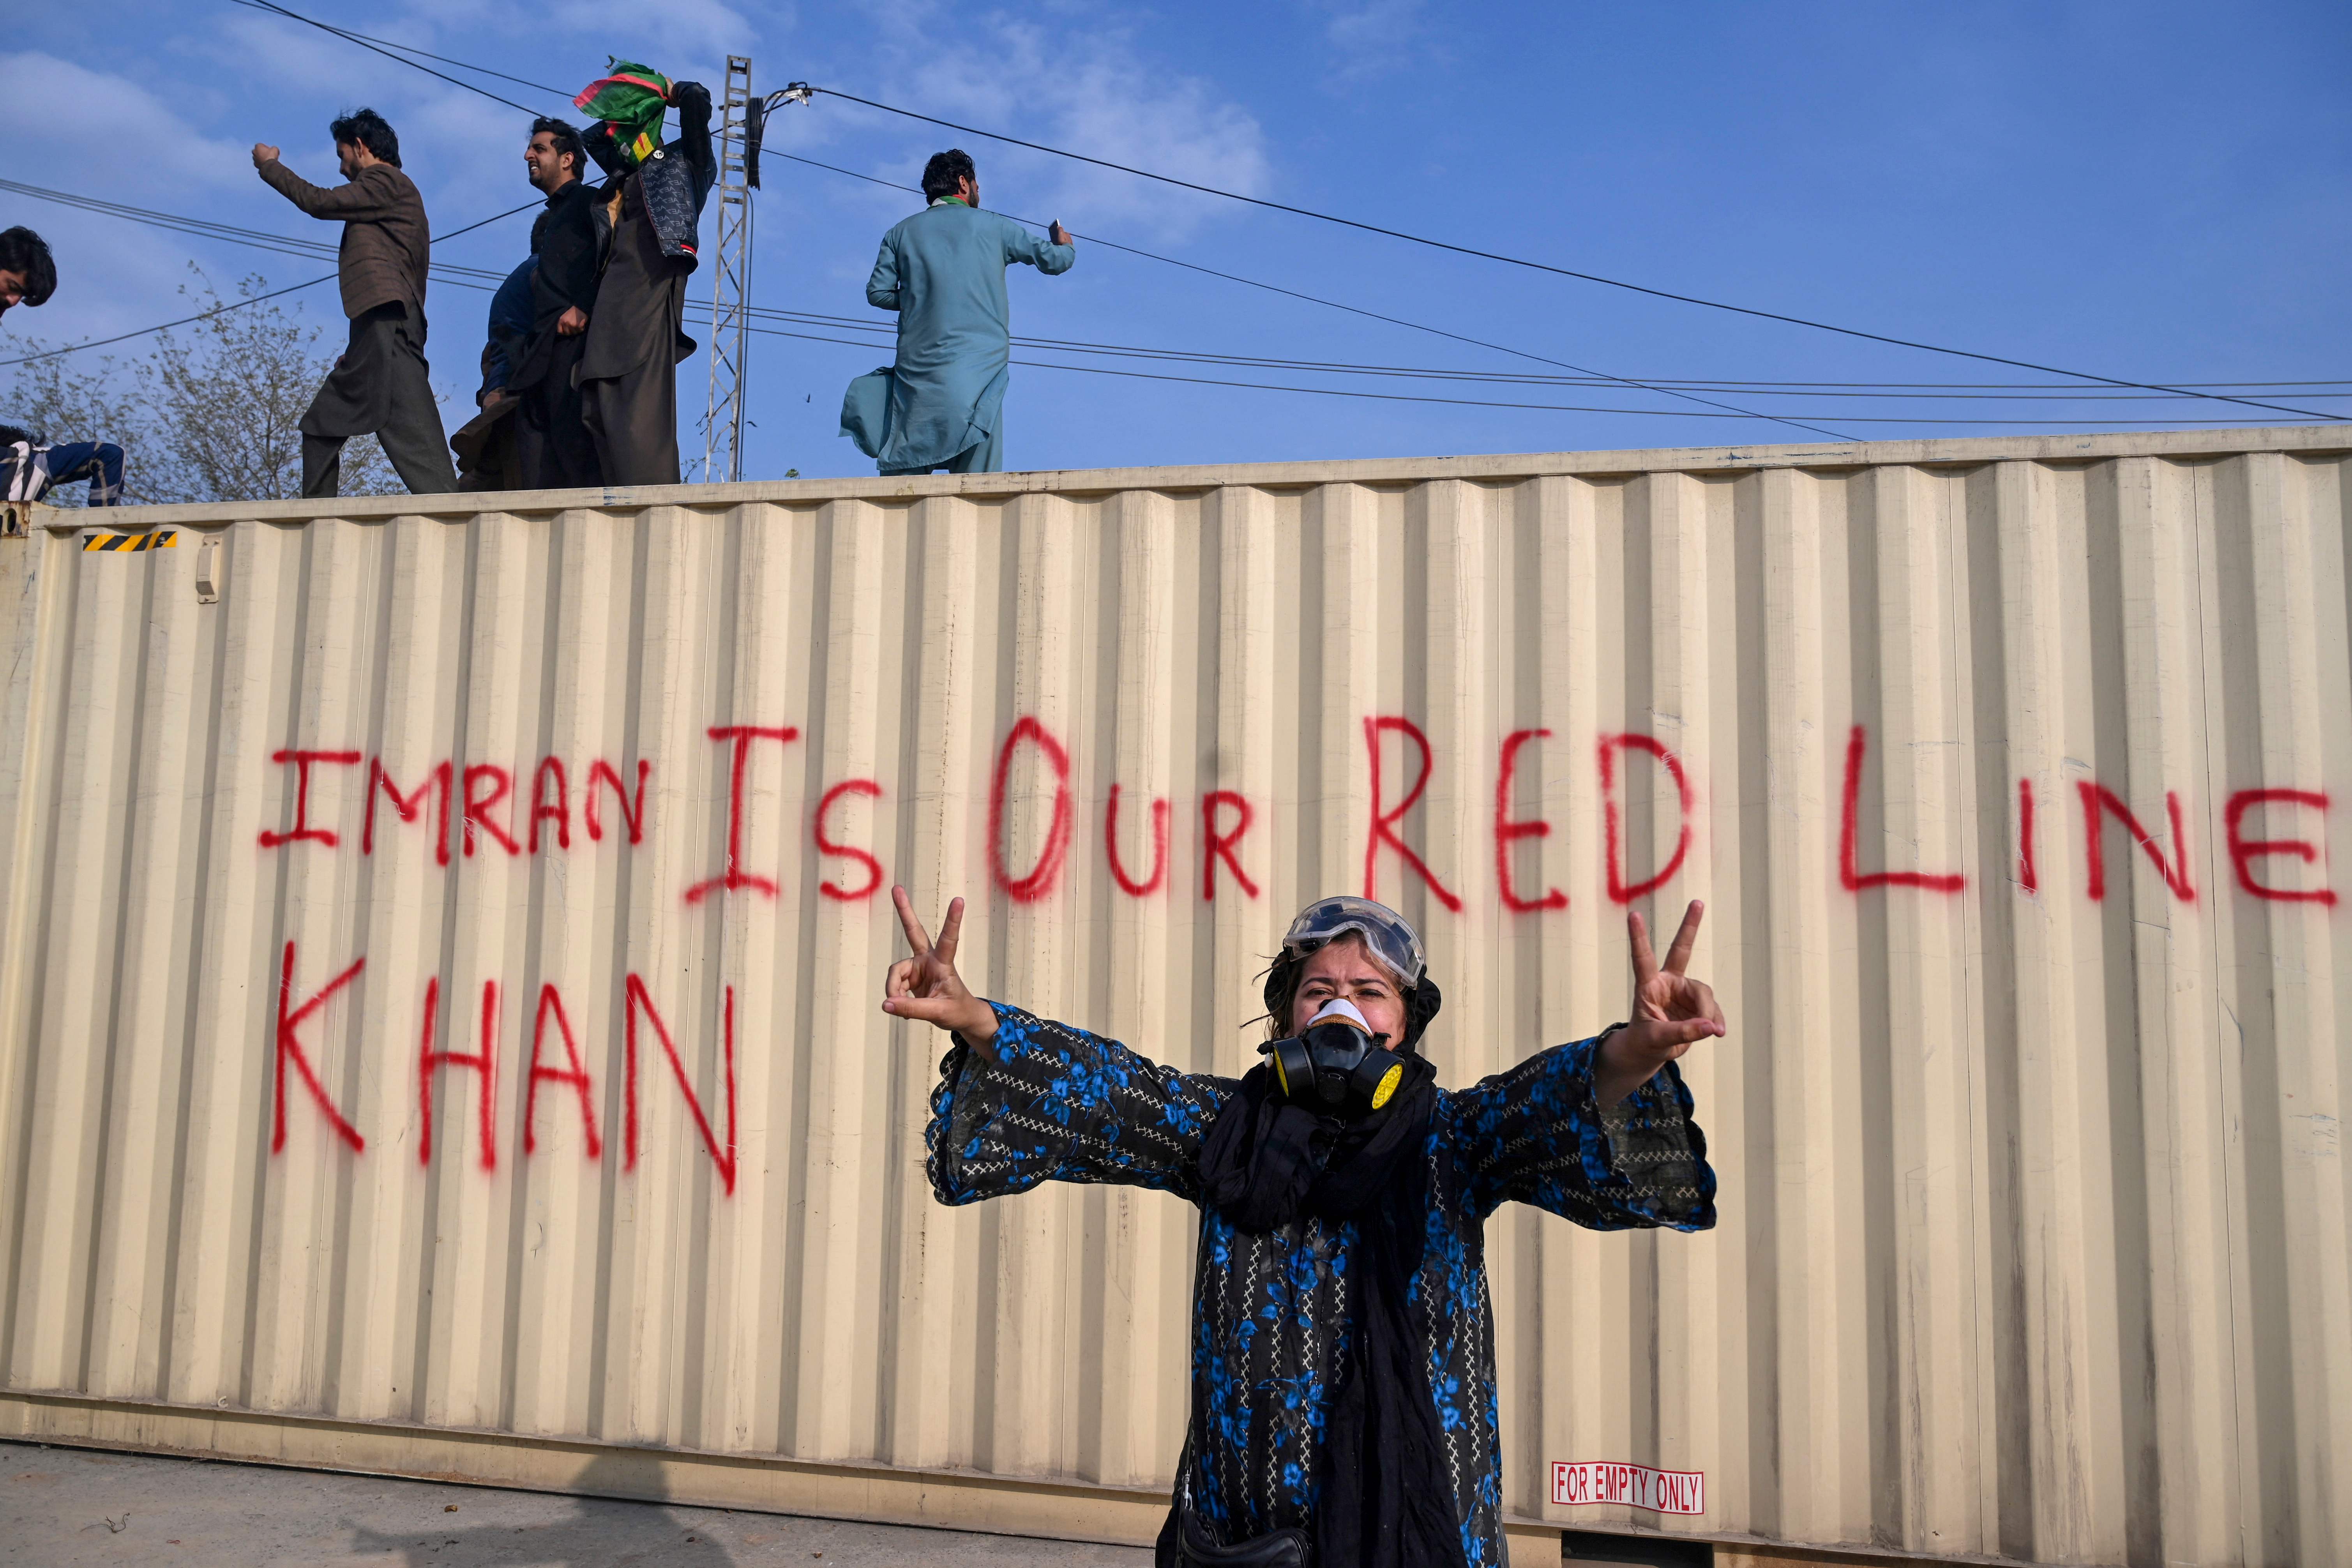 Police set up containers to stop the workers, but people continued to cross them and move forward - Photo: AFP